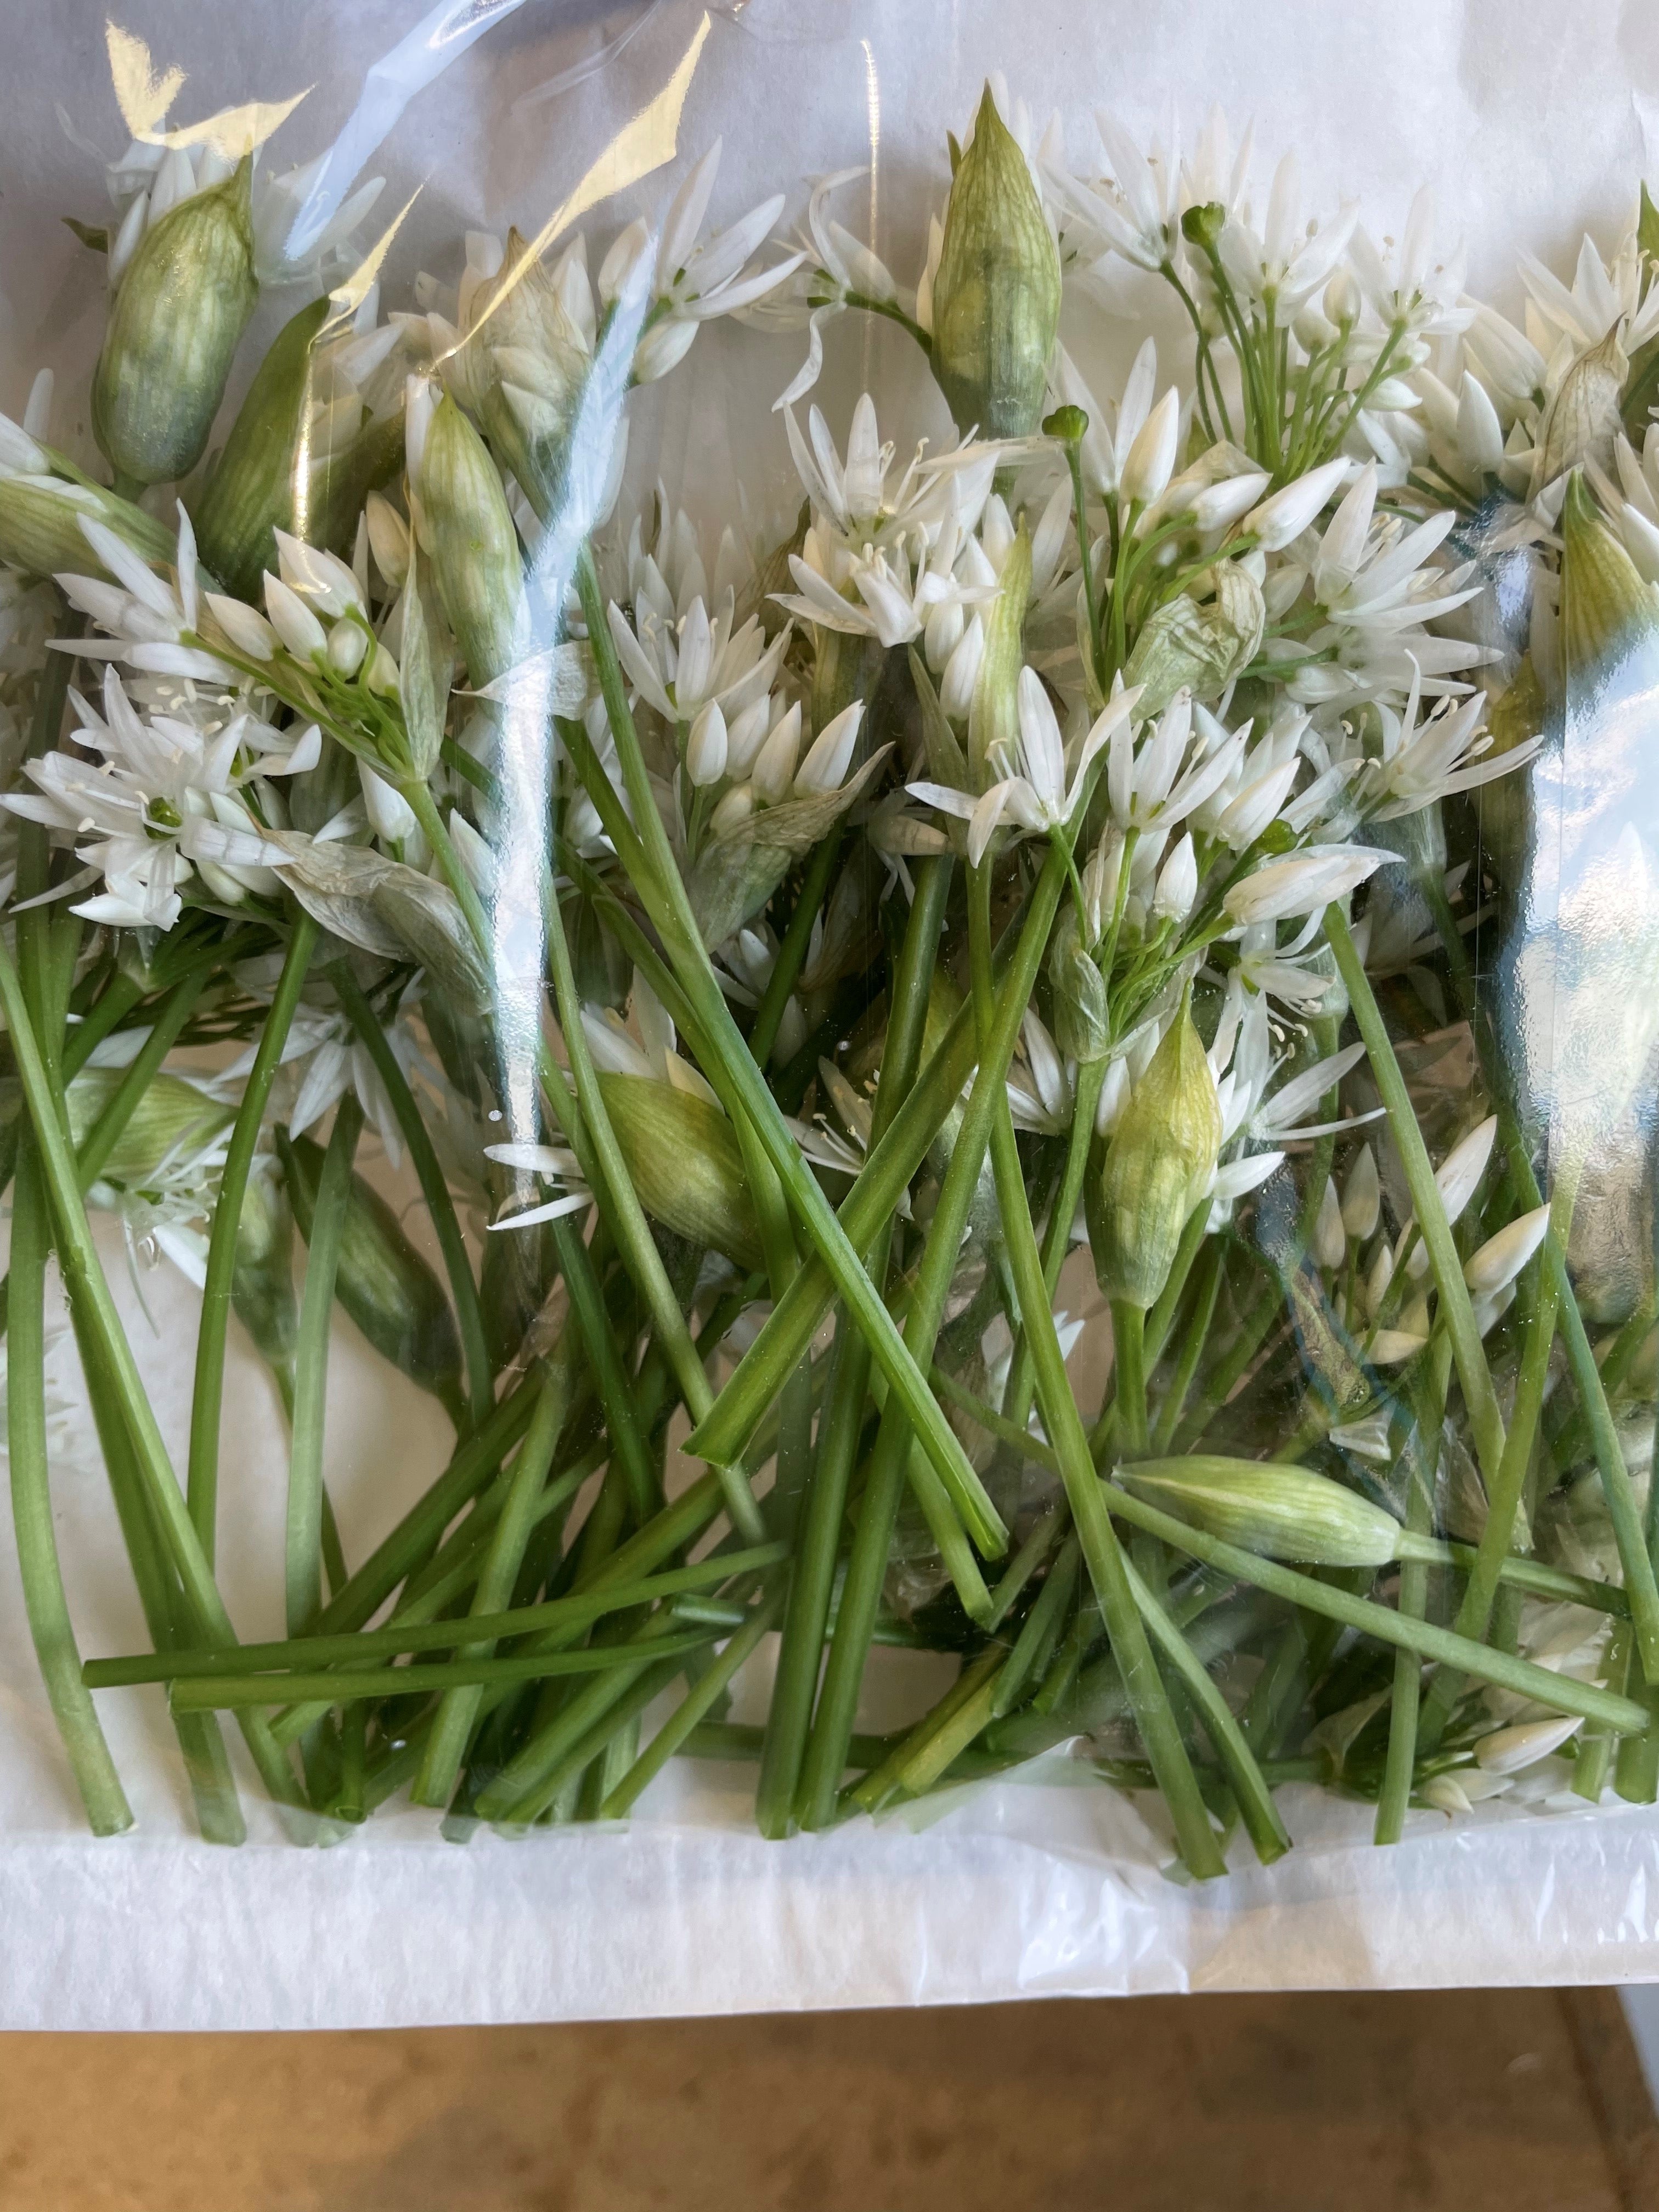 Local and Lovely Wild Garlic flowers and Asparagus